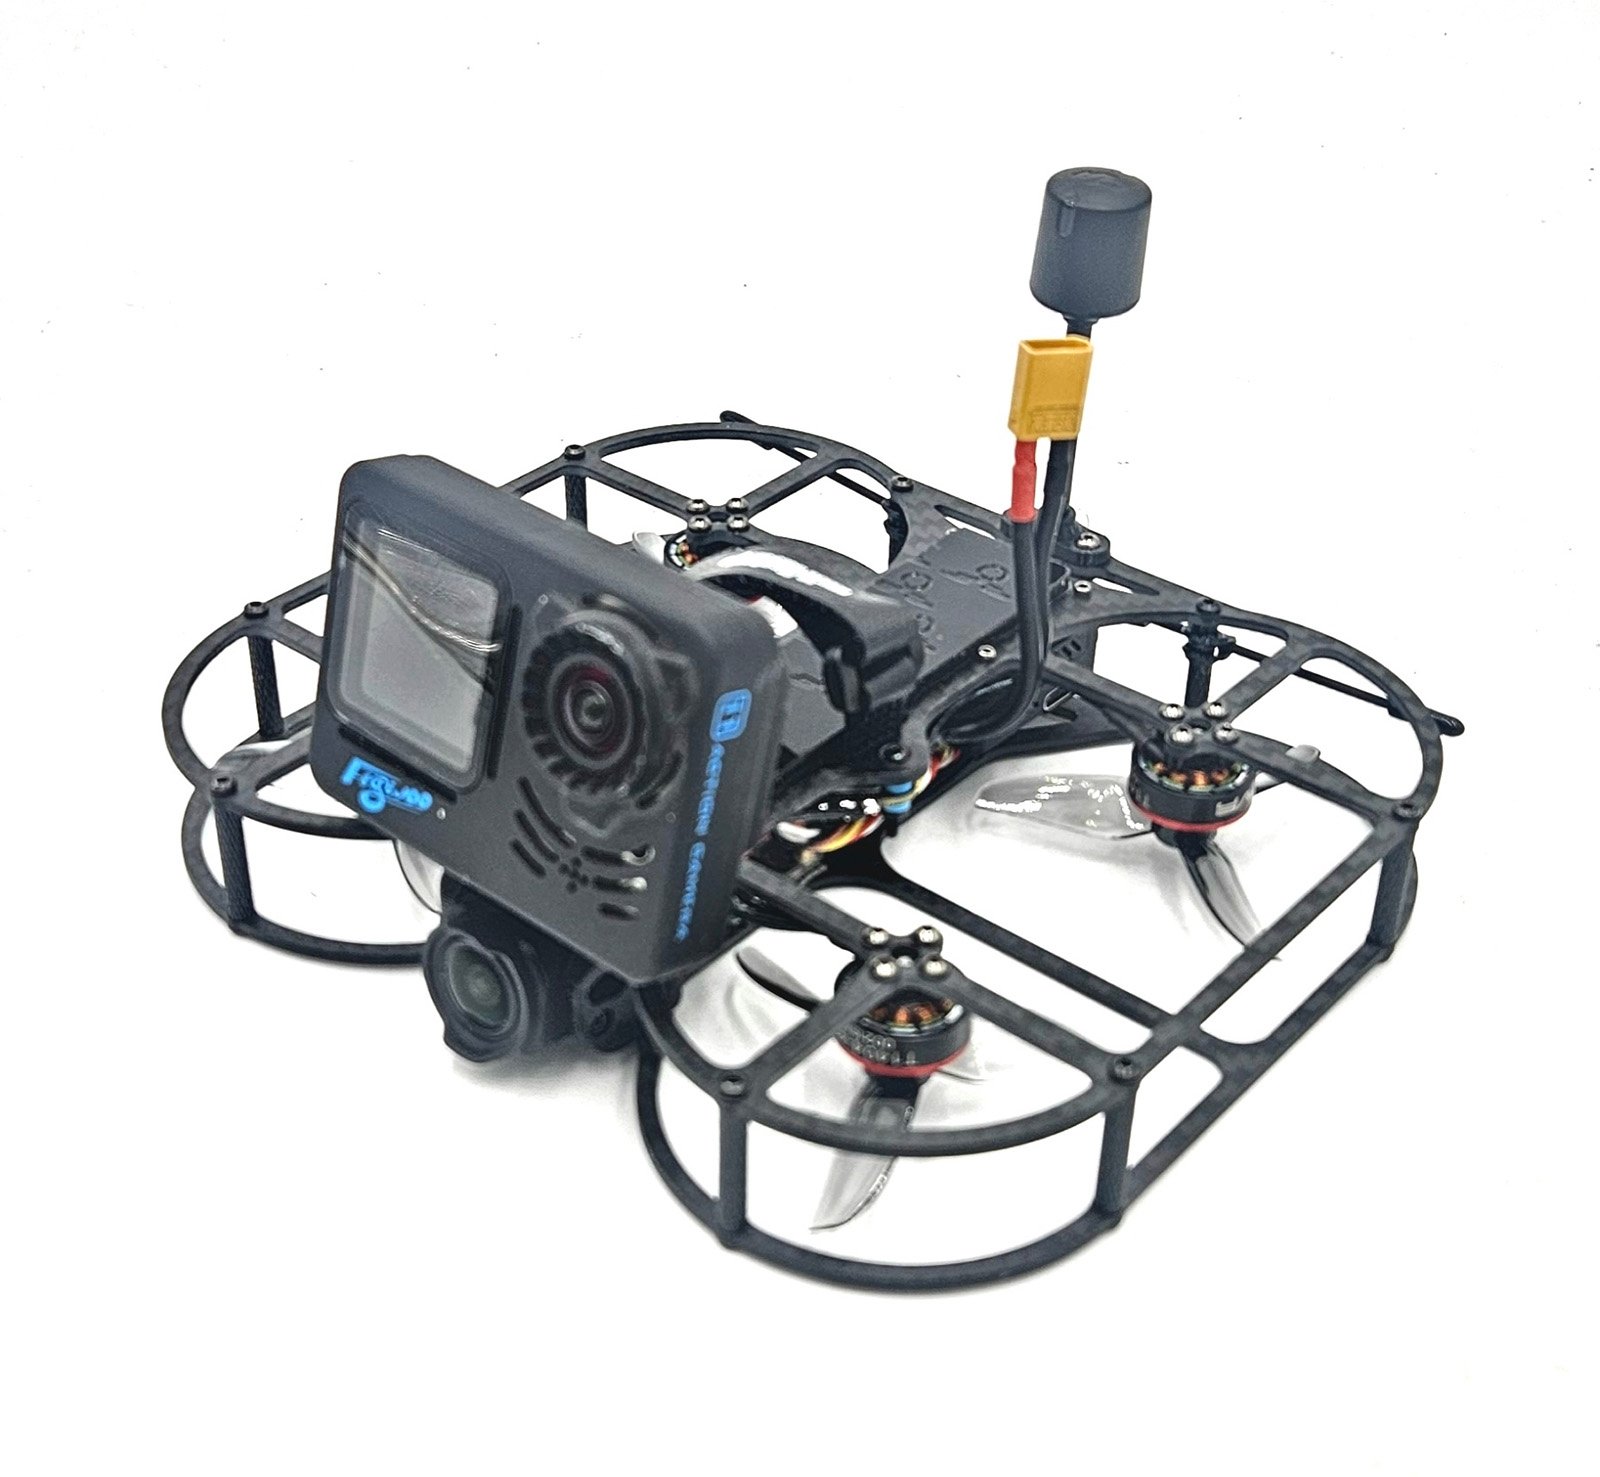 Image of GoPro FPV drone, a lightweight aircraft capable of flying in built-up areas and obtaining exemptions for flying over people with proper risk assessments and approvals.